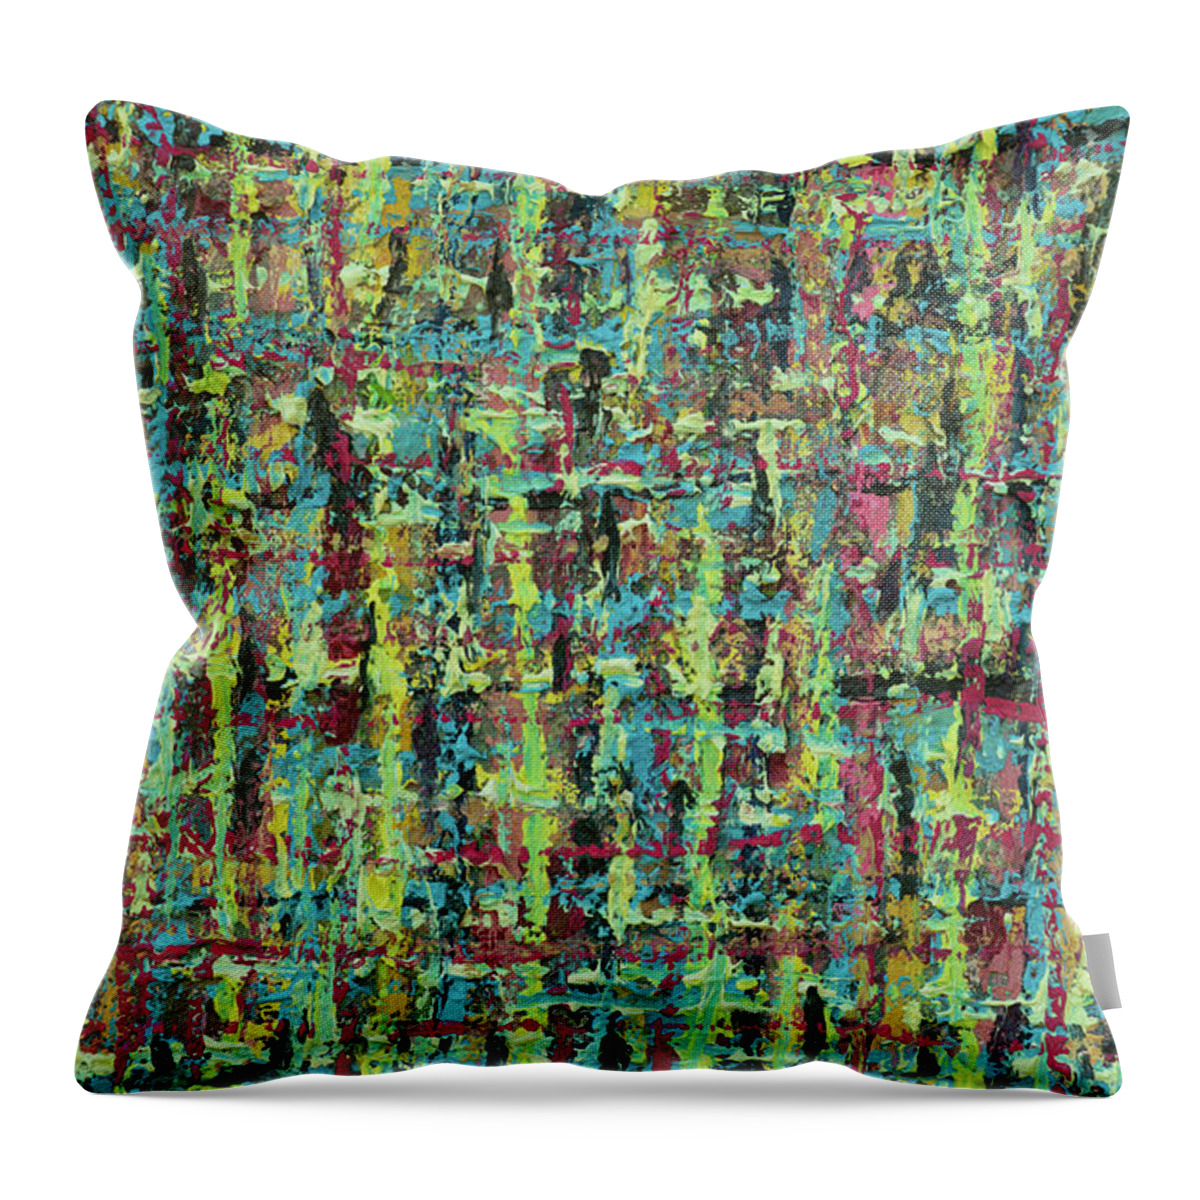 Popular Photo Throw Pillow featuring the painting criss Cross by Ofra Wolf